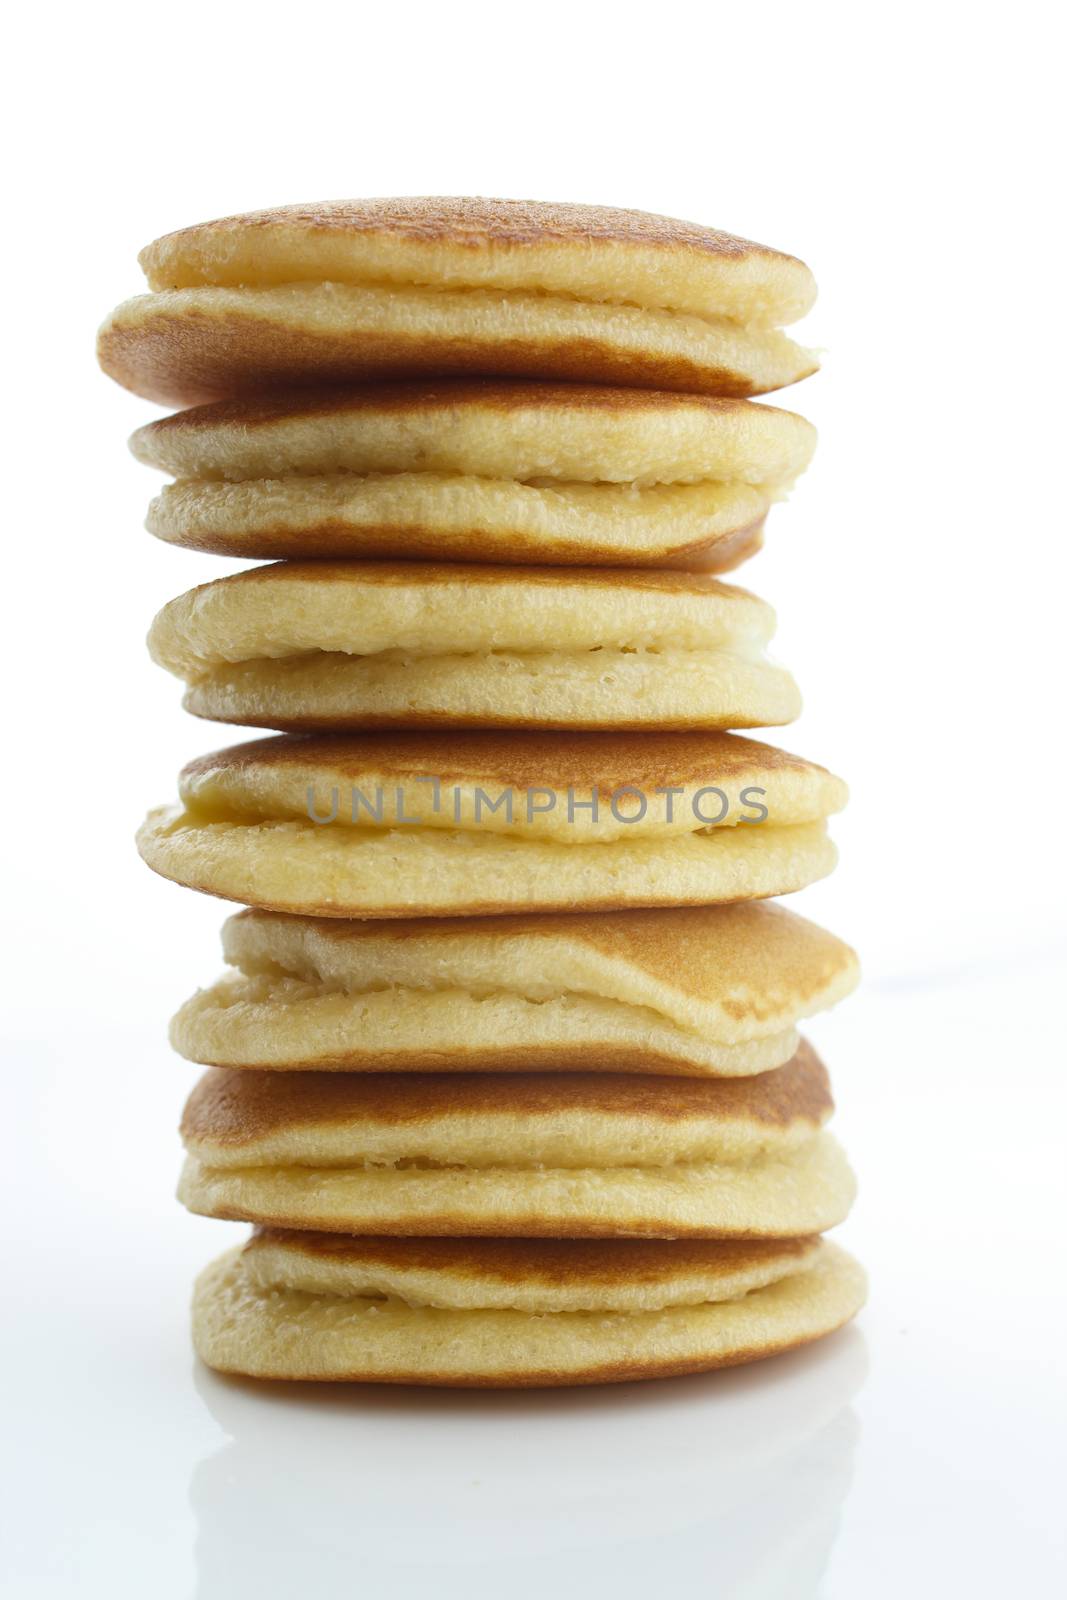 Stacked of pancakes by vitawin